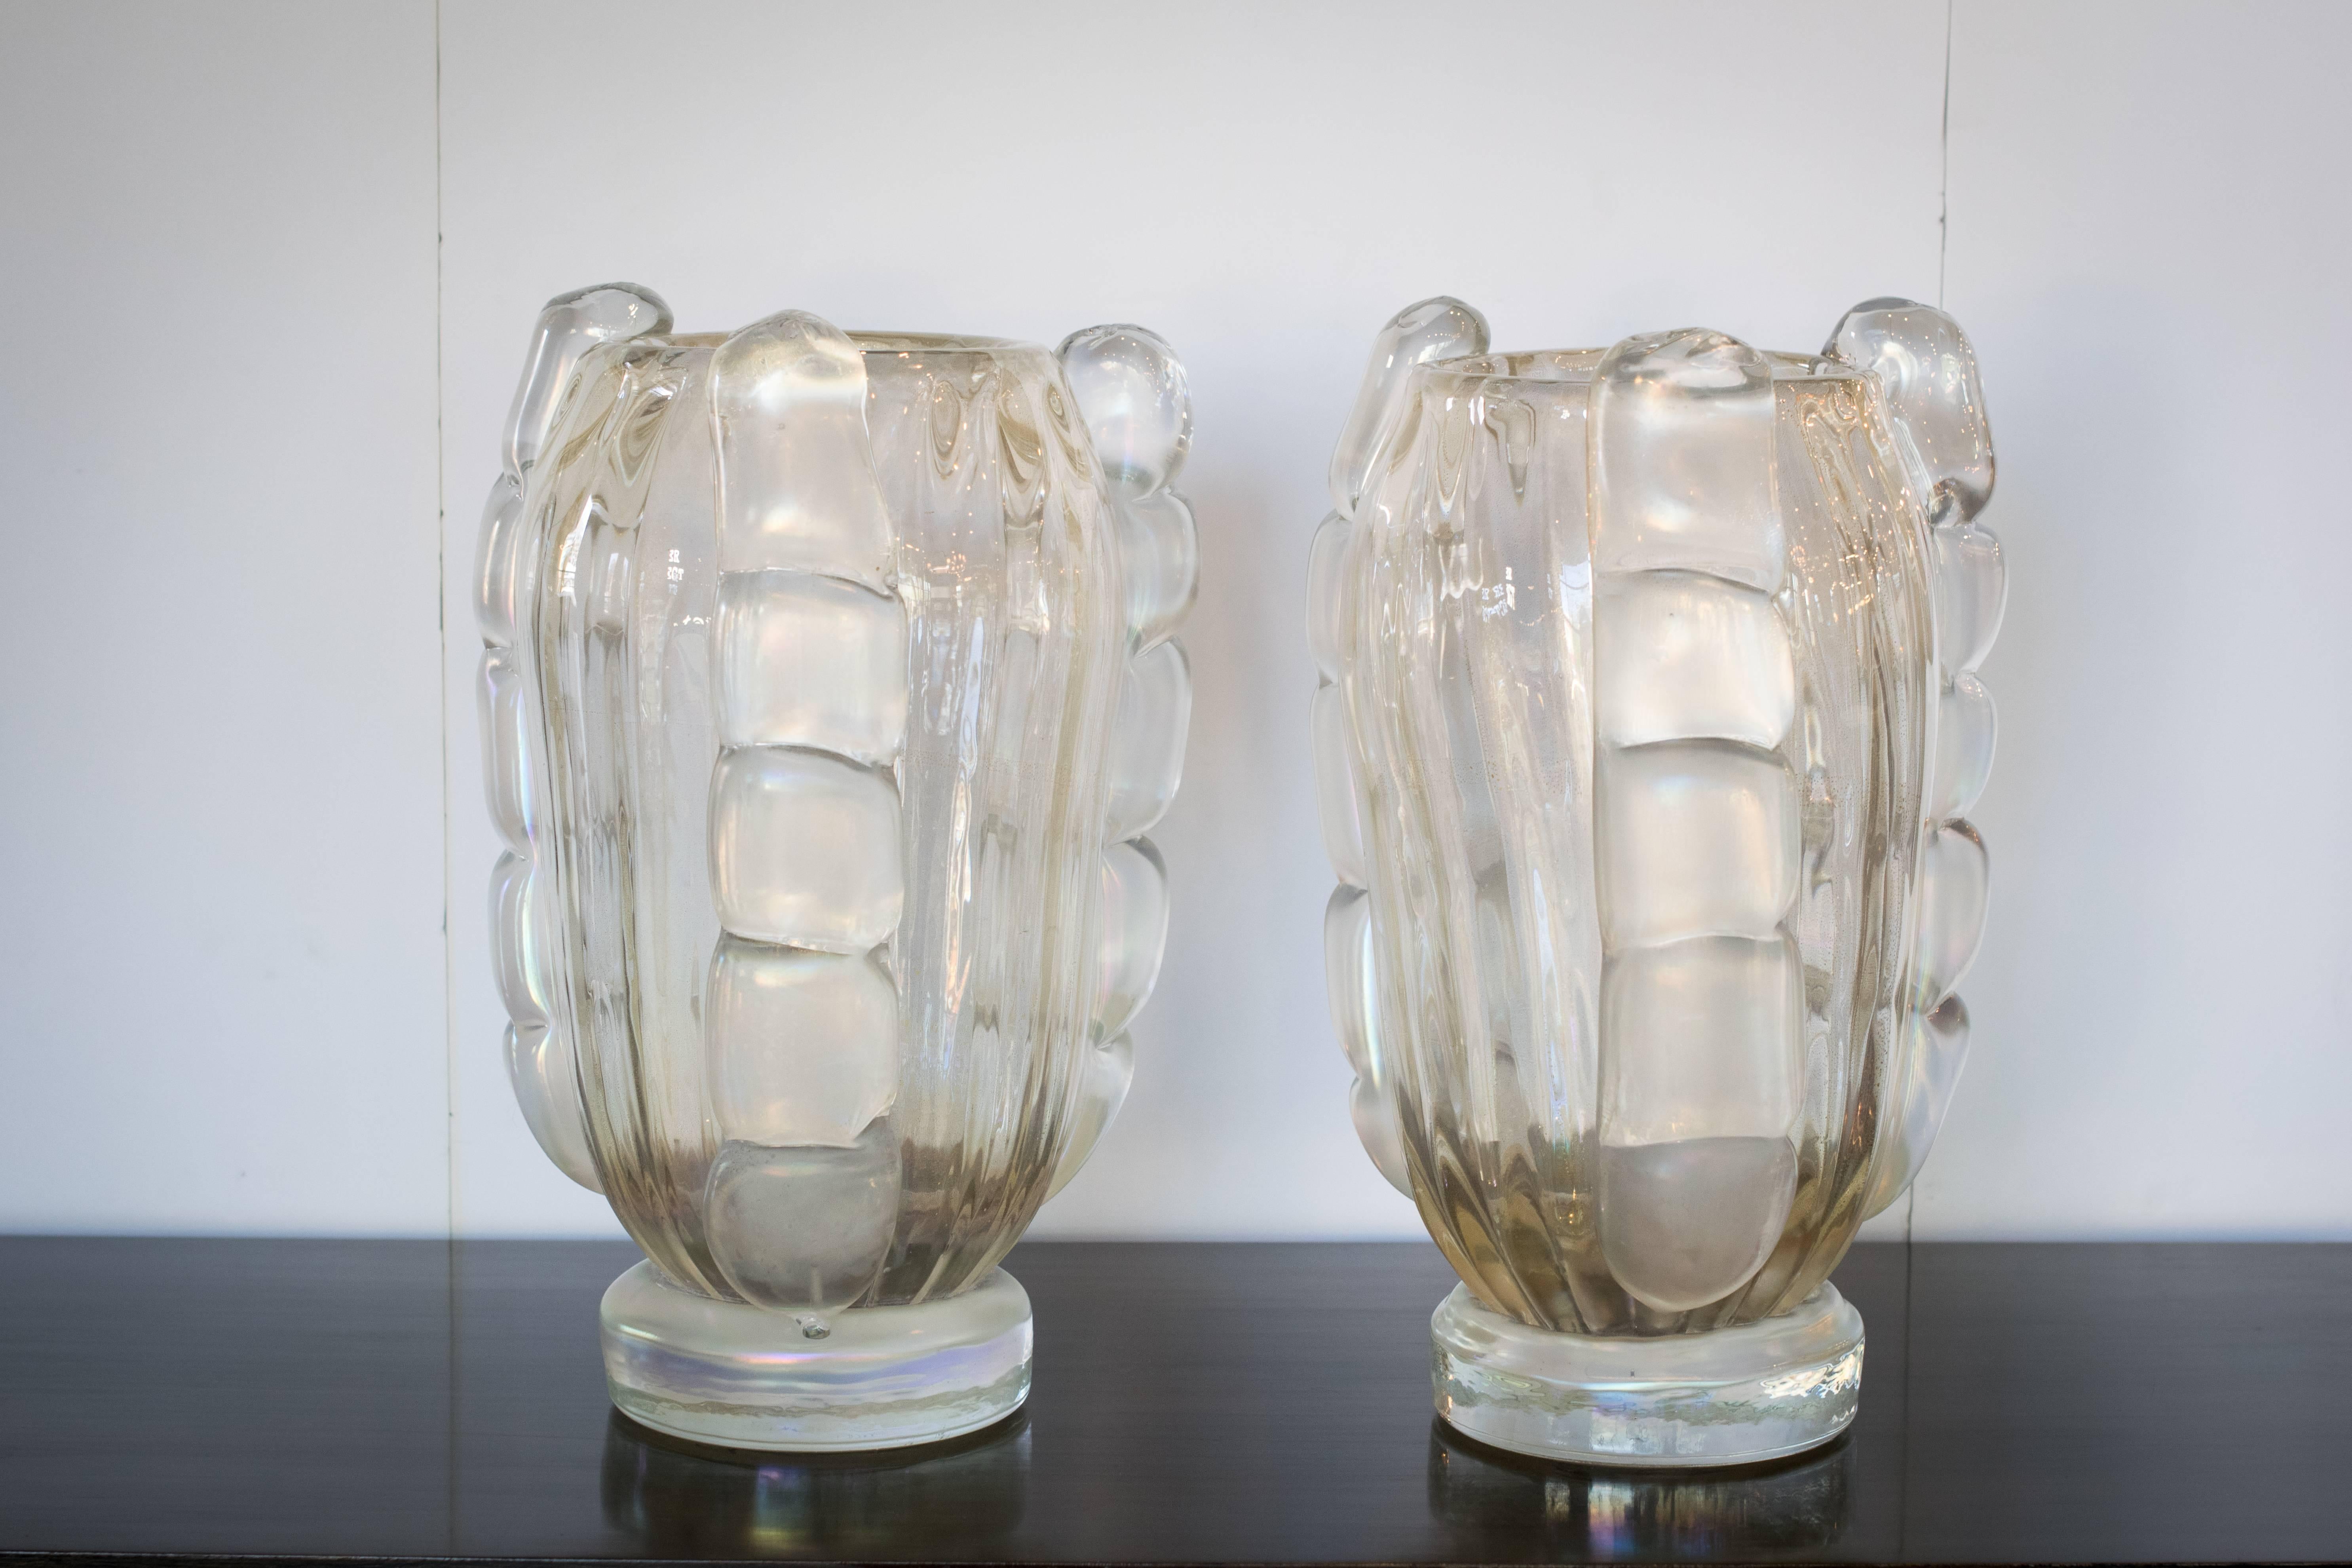 Murano handblown vases of opaline glass made by prestigious Italian glassblower, Sergio Costantini. Clear glass with polvere d'oro (23-karat gold leaf flecks) is layered over white opaline glass, creating beautiful 